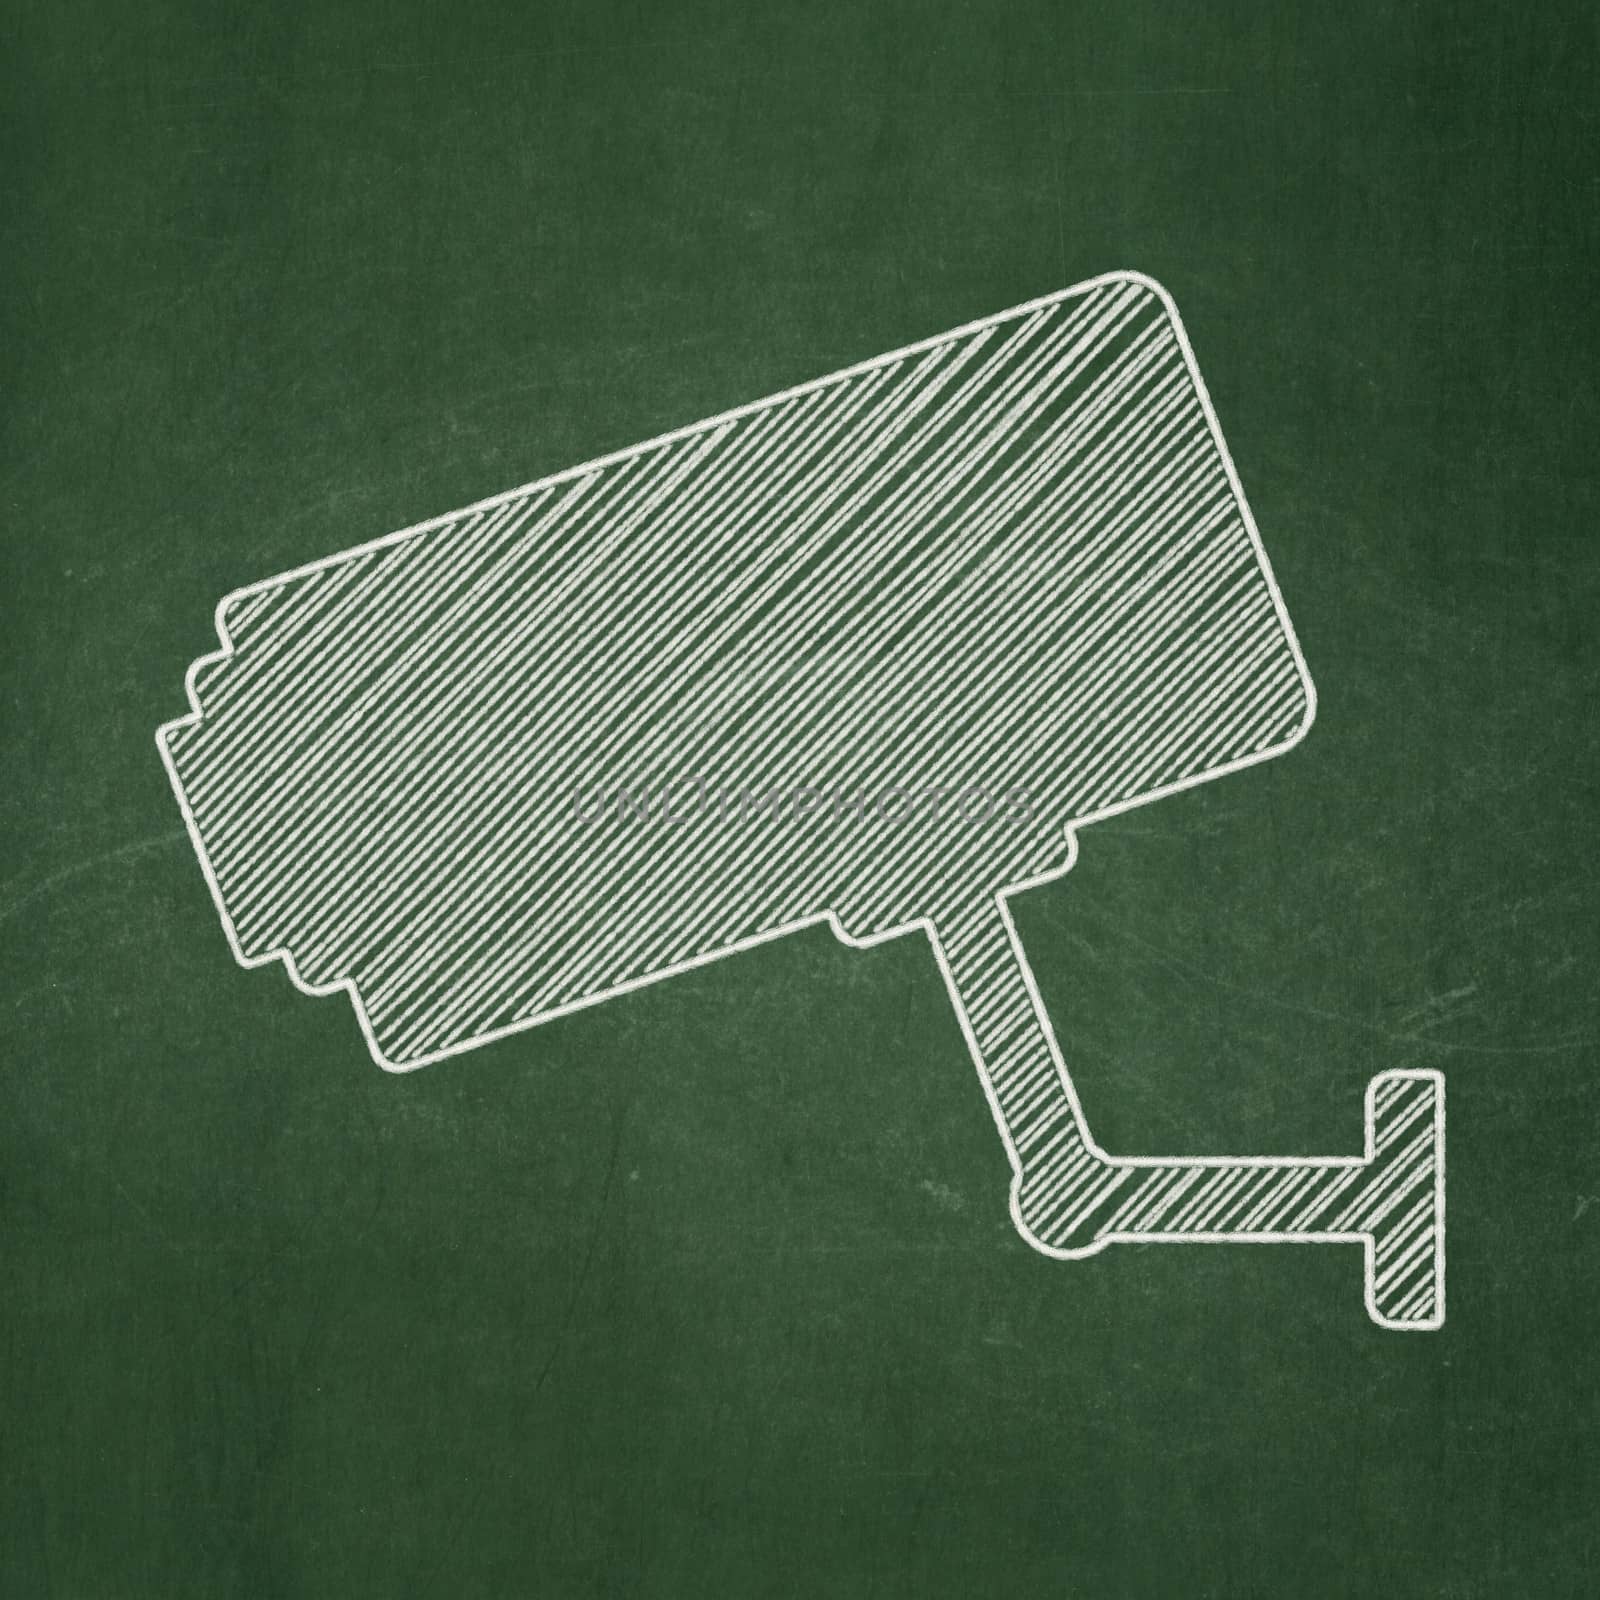 Privacy concept: Cctv Camera icon on Green chalkboard background, 3d render